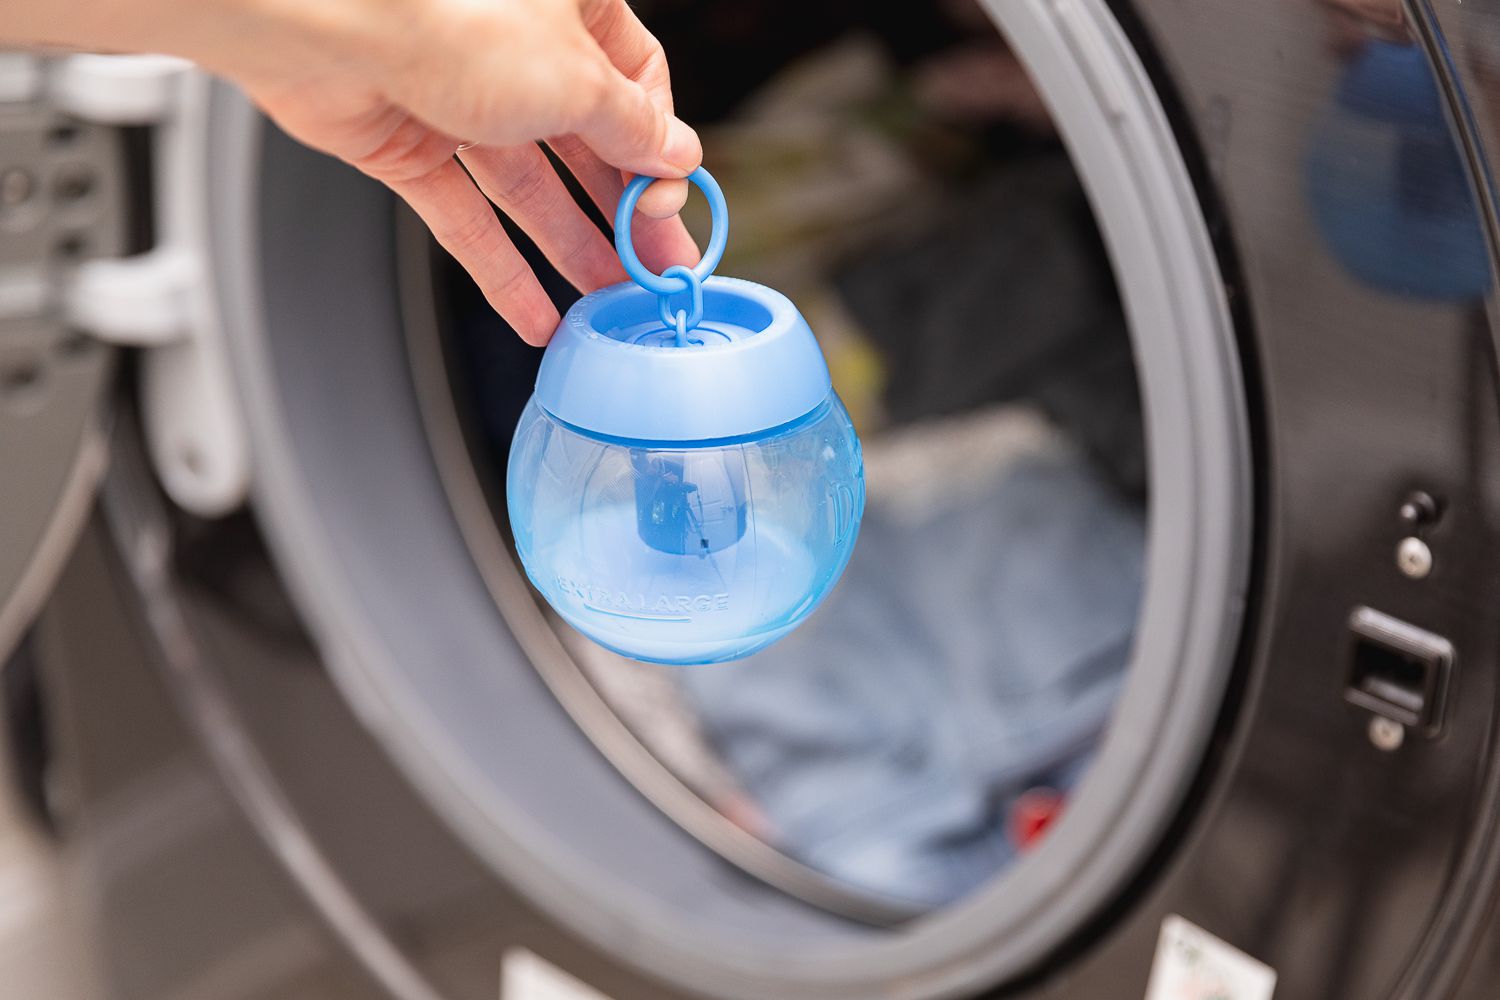 How To Use Fabric Softener In A Washing Machine Without A Dispenser